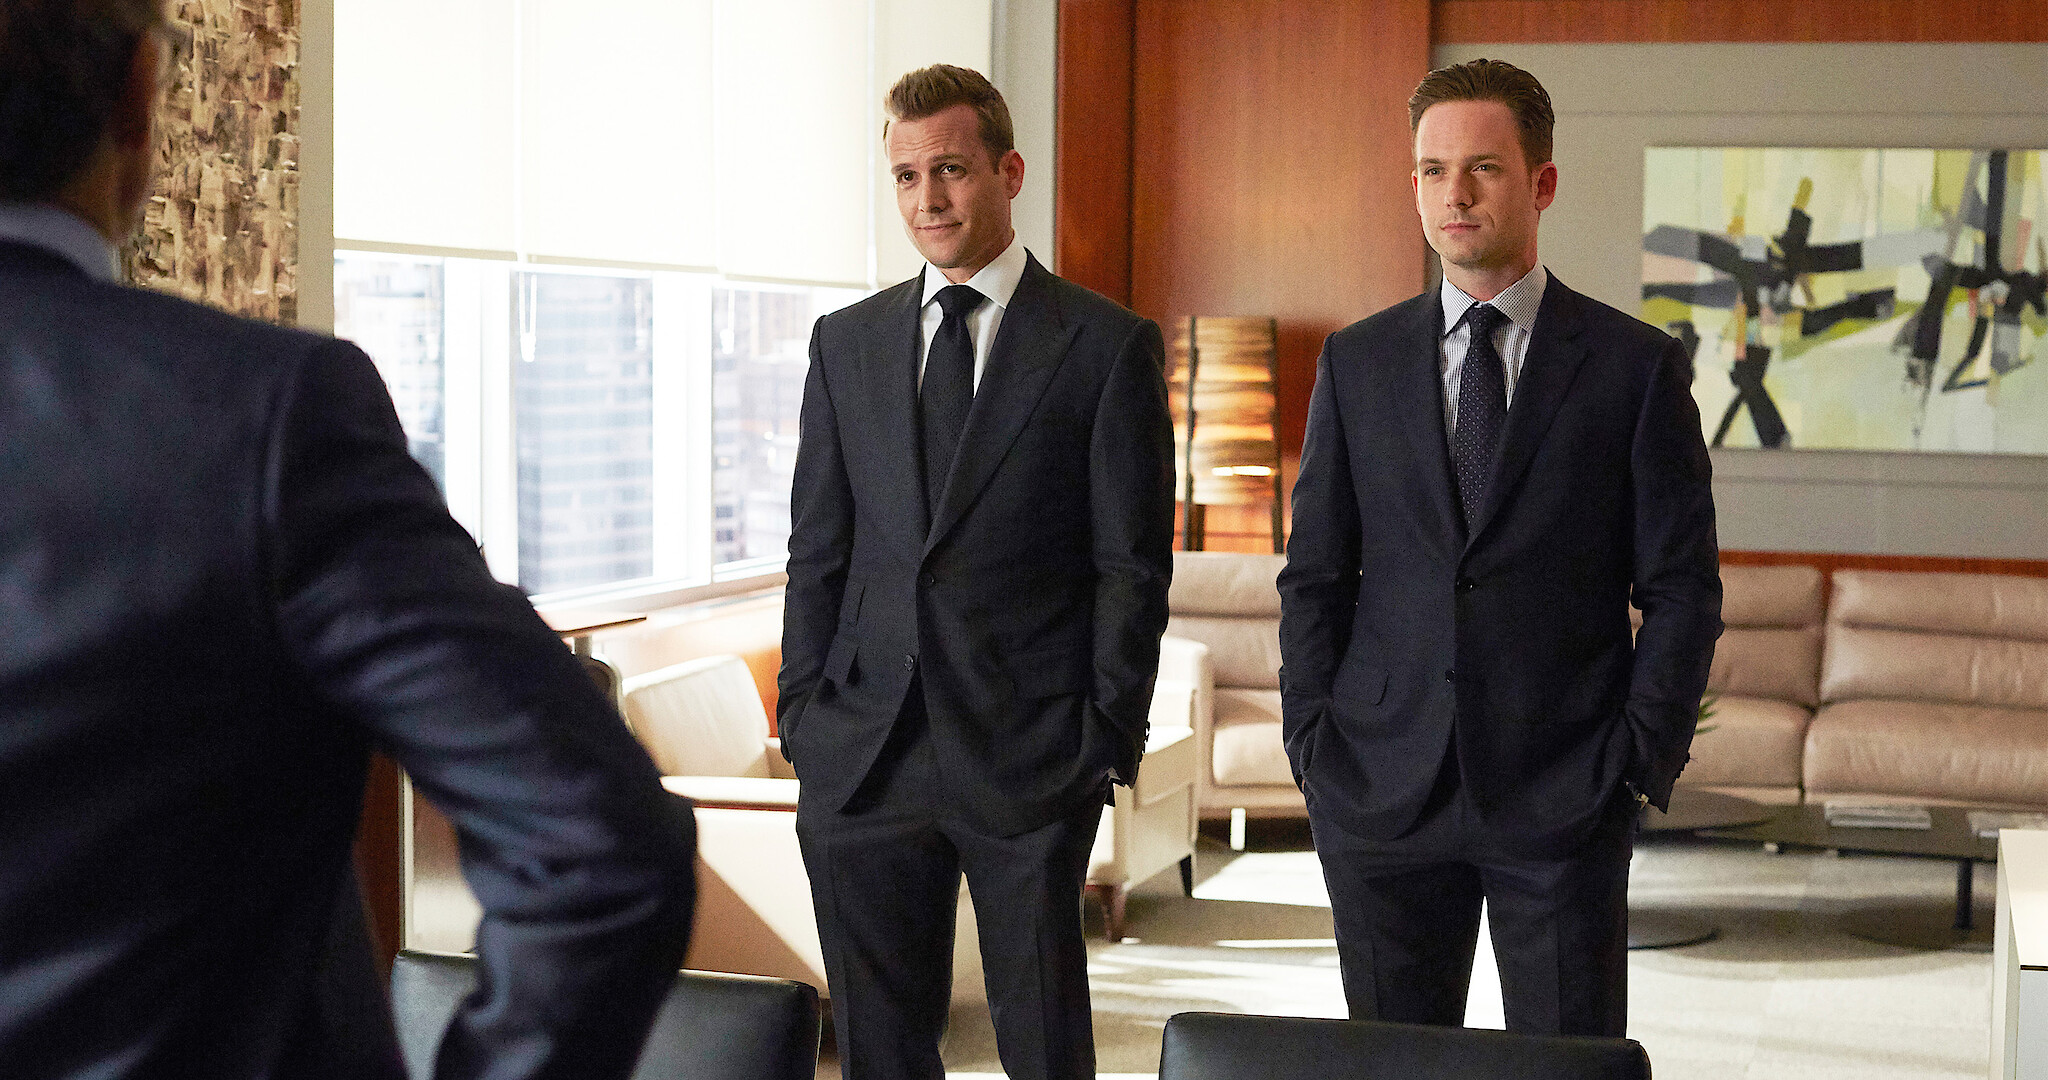 Suits Season 1 recap Who was the traitor?